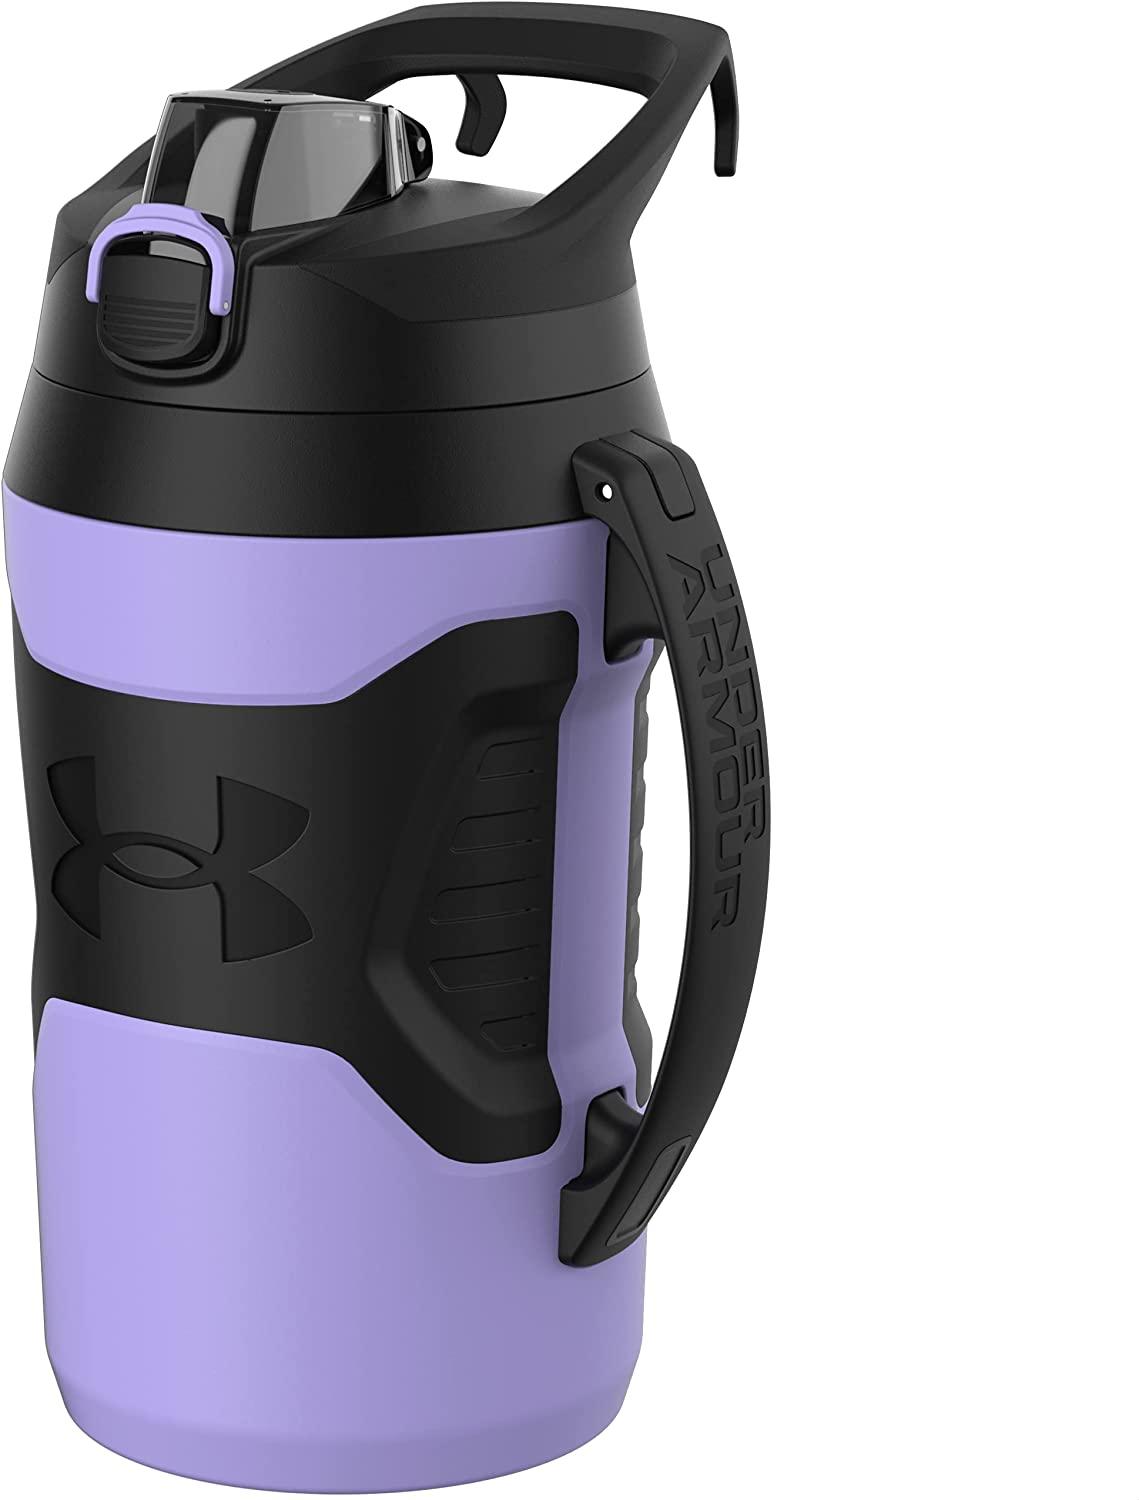 Under Armour water jug in blue 